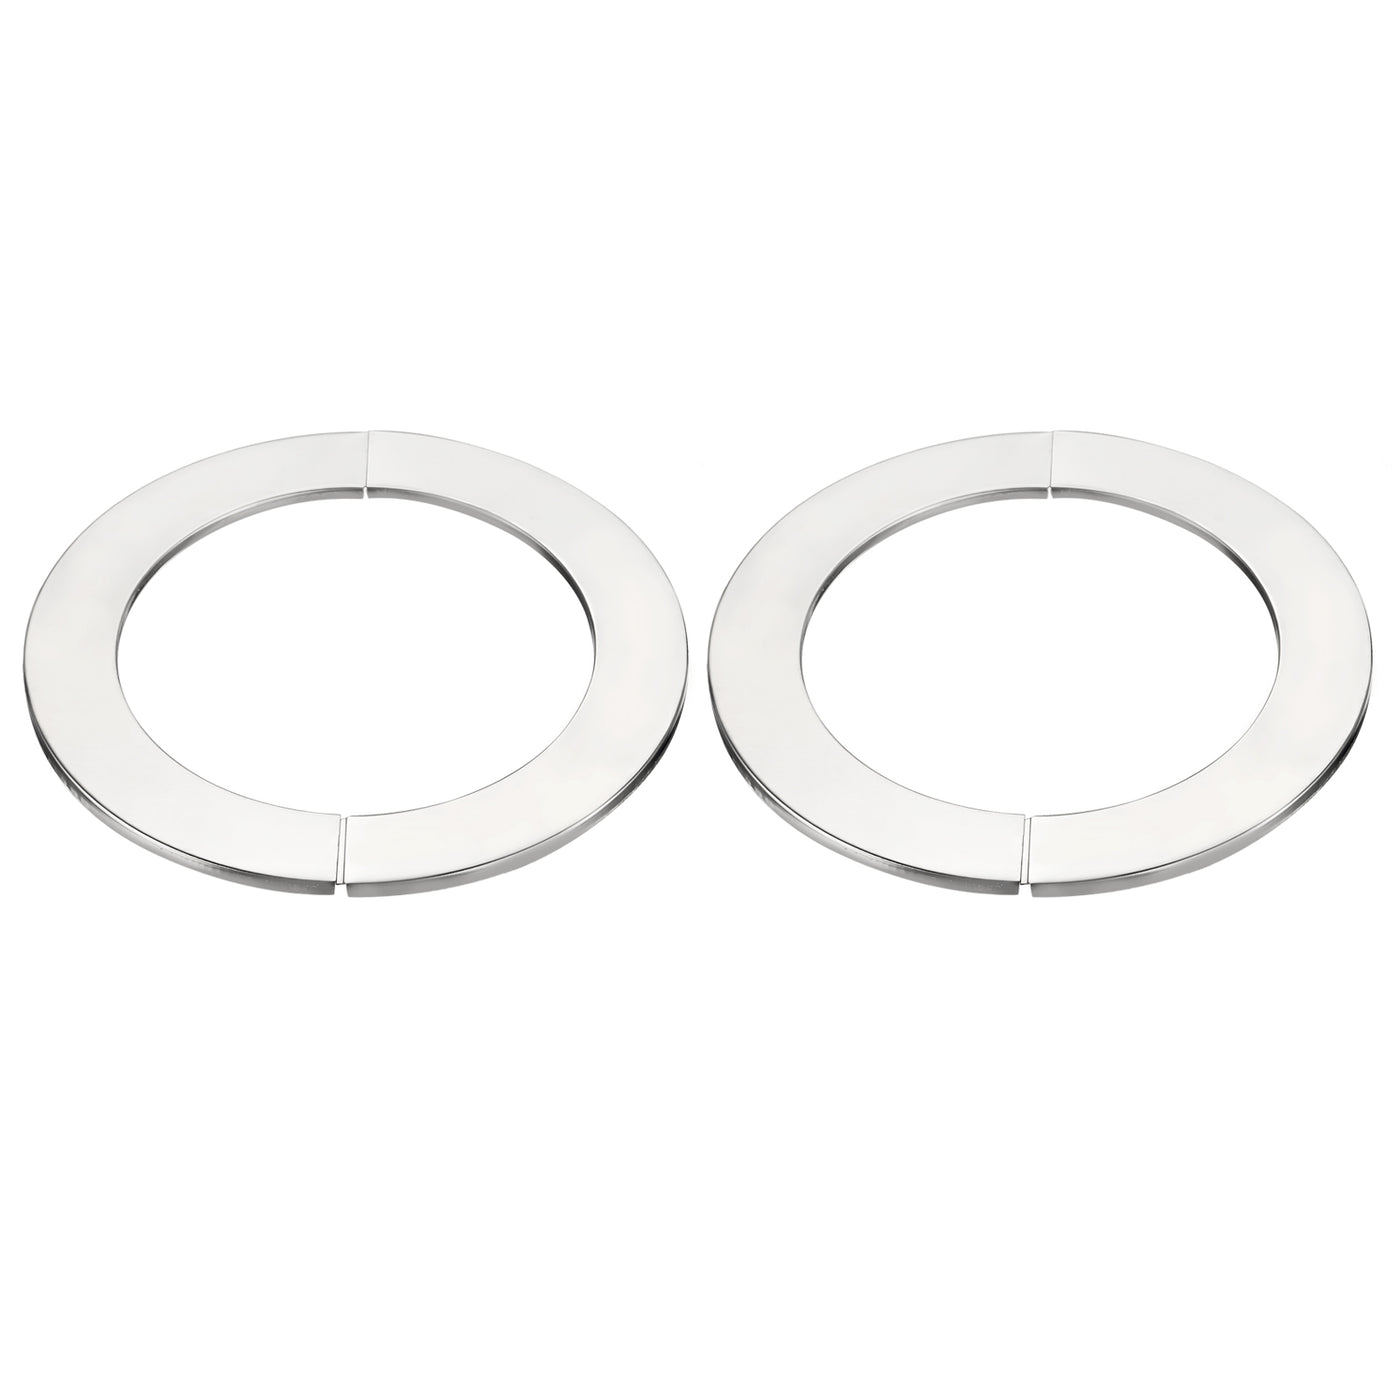 Uxcell Uxcell Wall Split Flange, 201 Stainless Steel Round Escutcheon Plate for 171mm Diameter Pipe 2Pcs